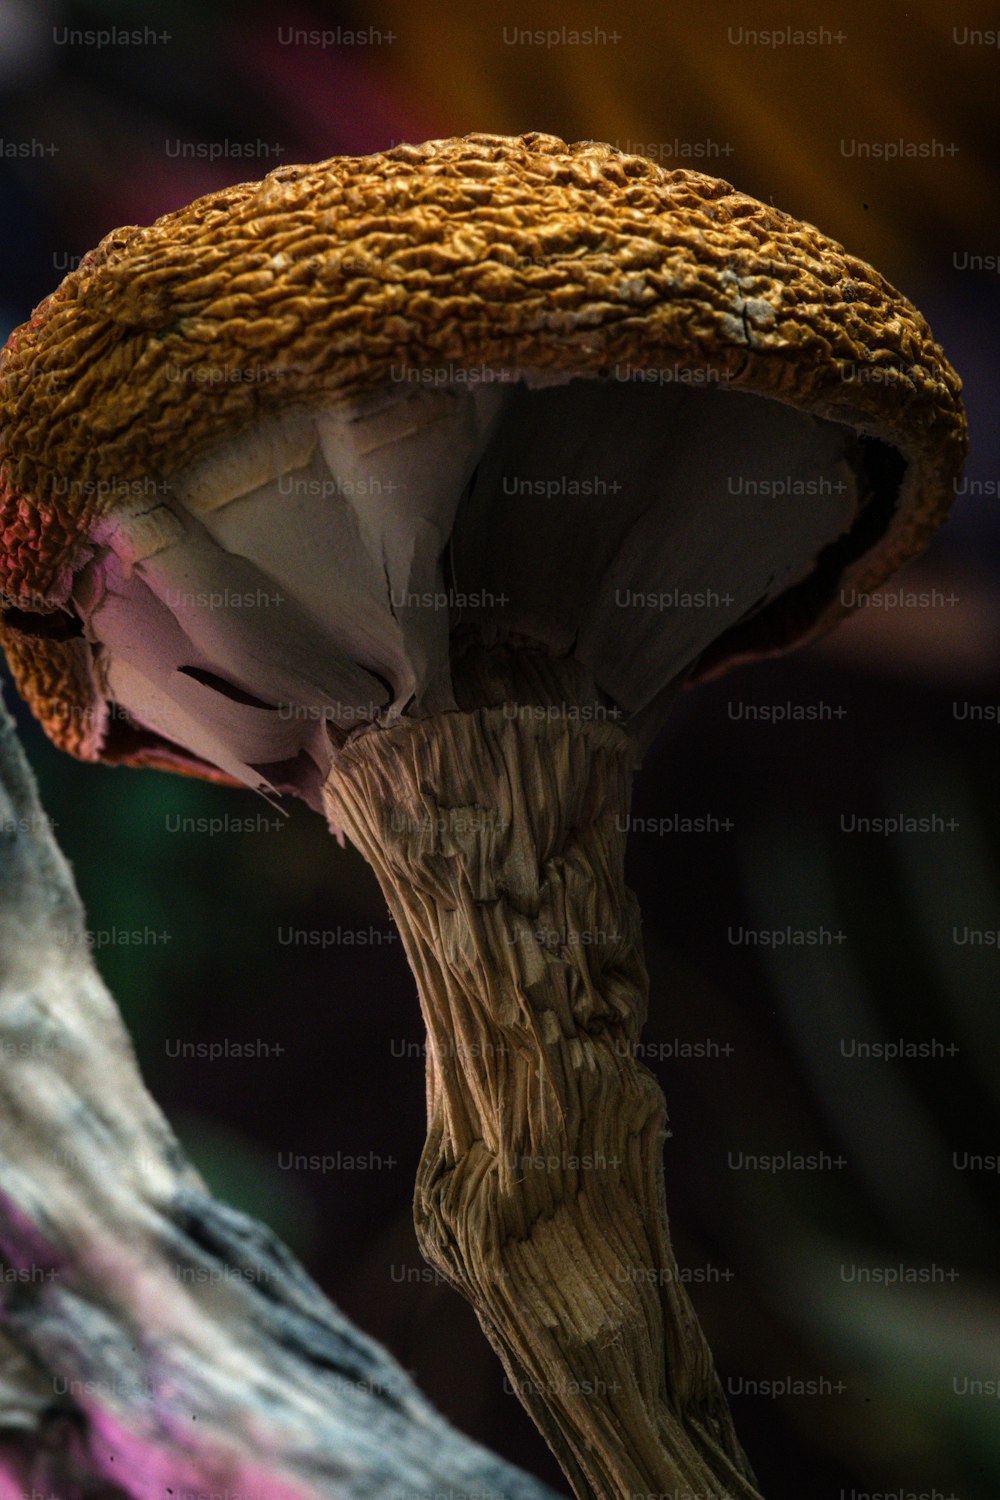 a close up of a mushroom with a blurry background